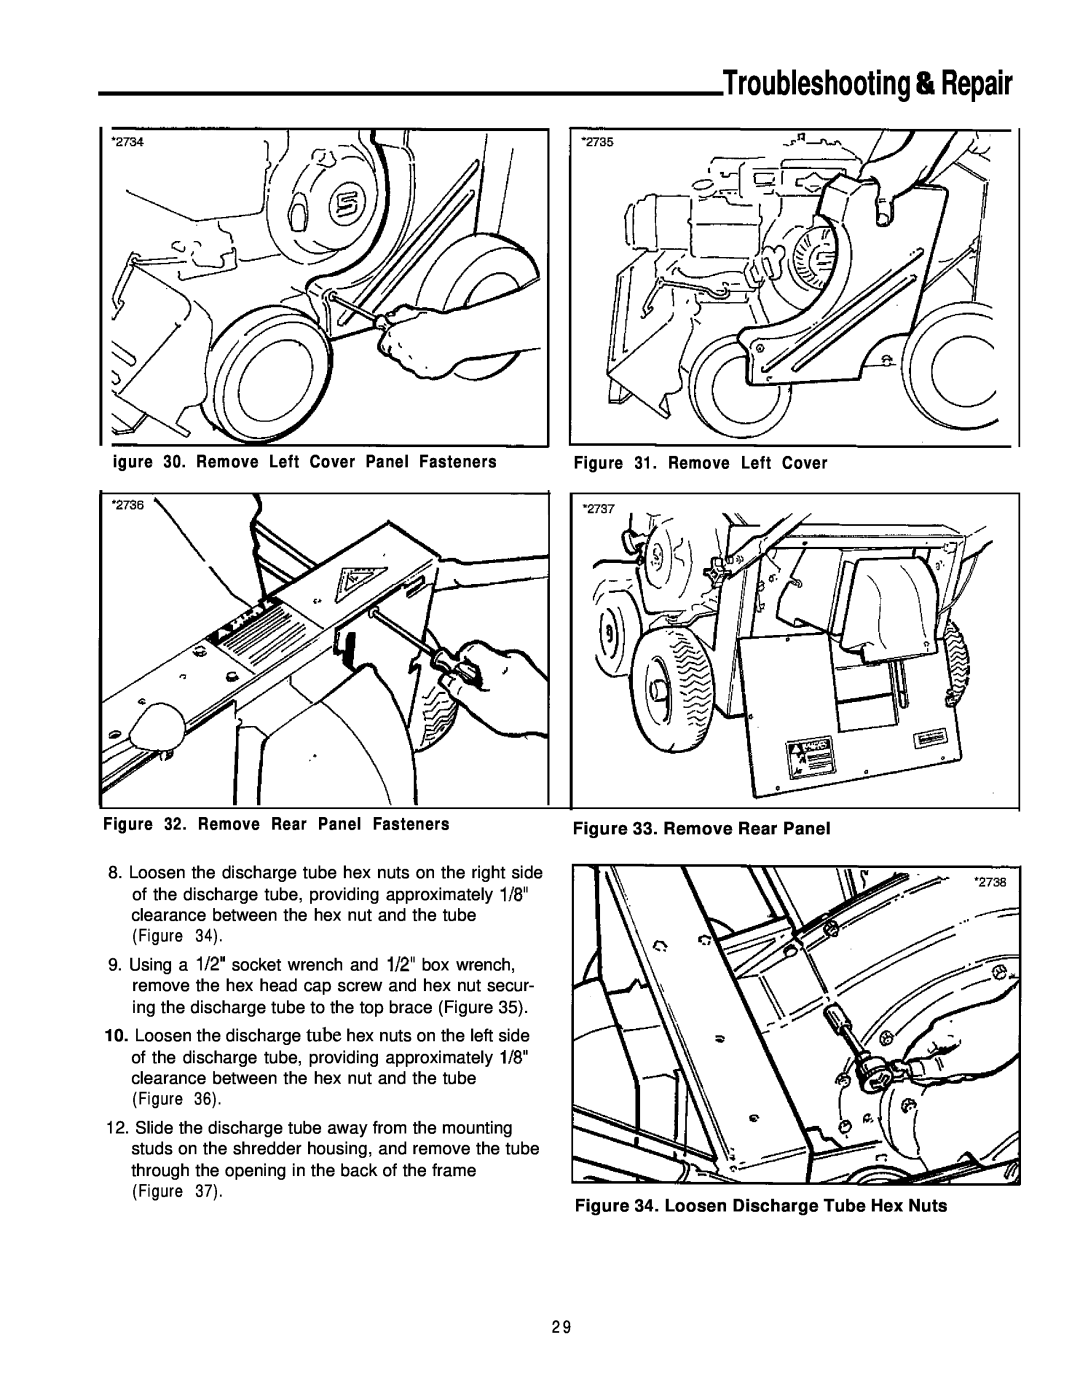 Simplicity 6/25, 8/25 Troubleshooting&Repair, igure 30. Remove Left Cover Panel Fasteners, Remove Rear Panel Fasteners 